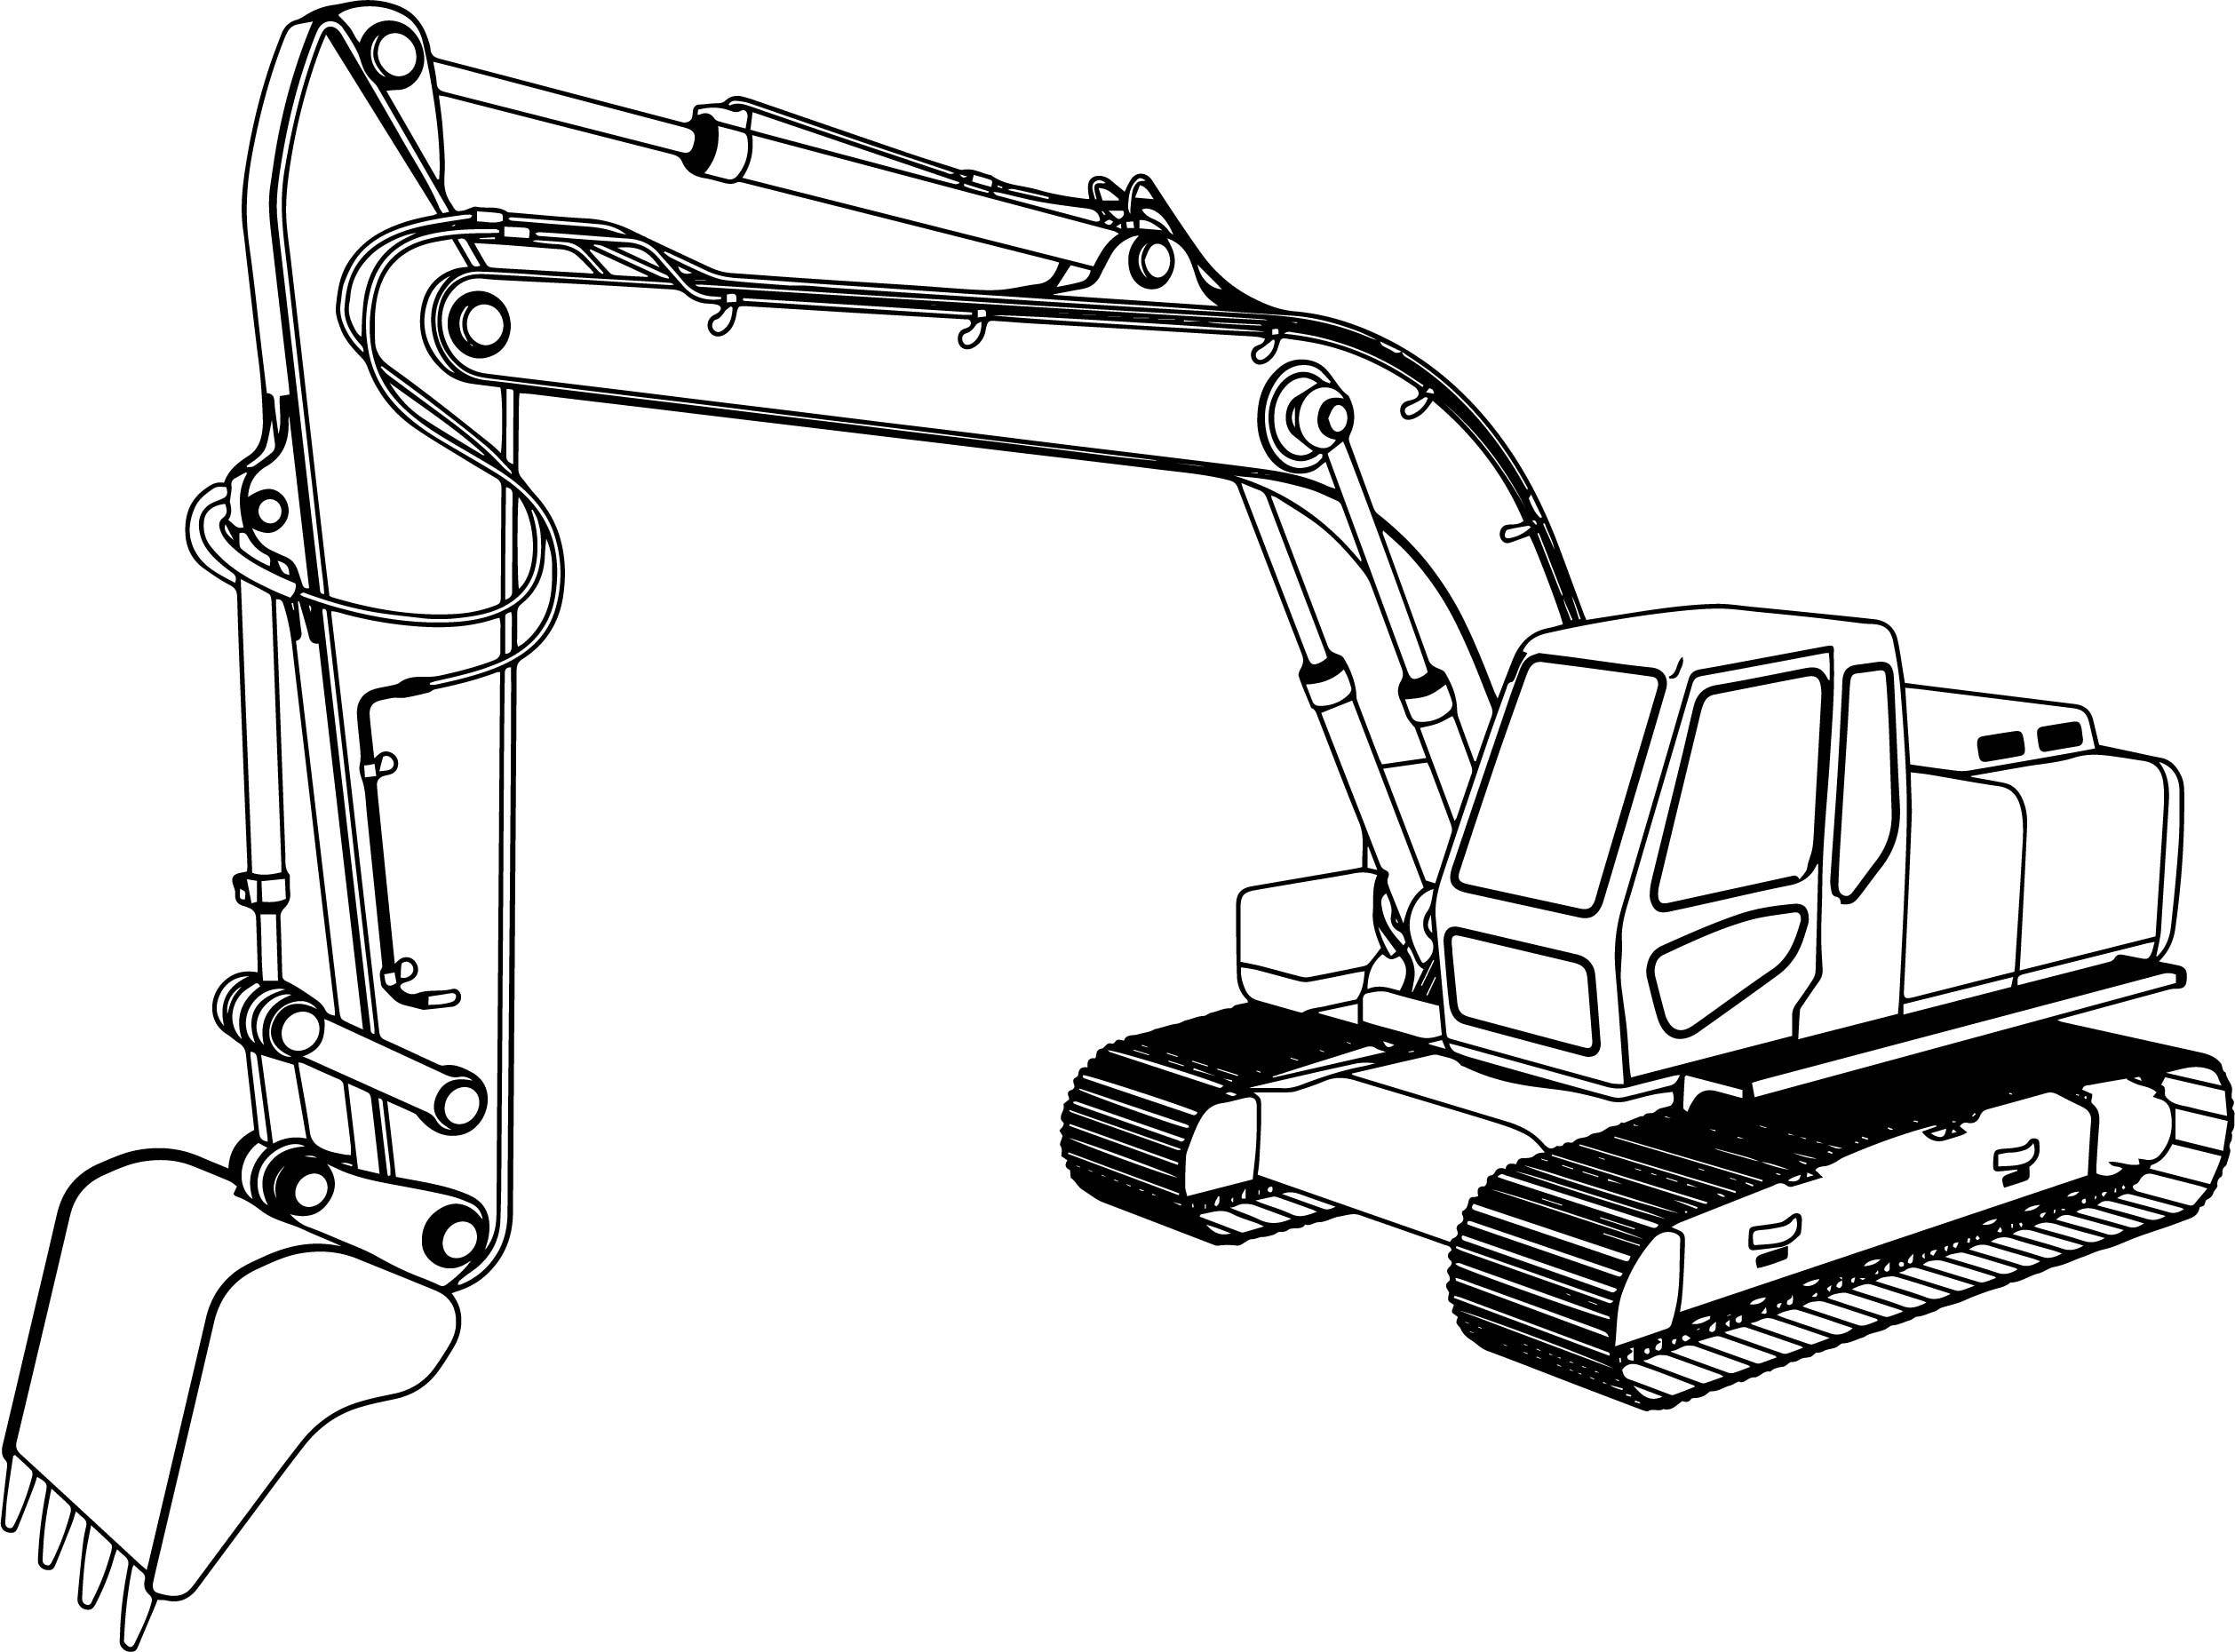 Dozer Coloring Pages at GetDrawings.com | Free for personal ...